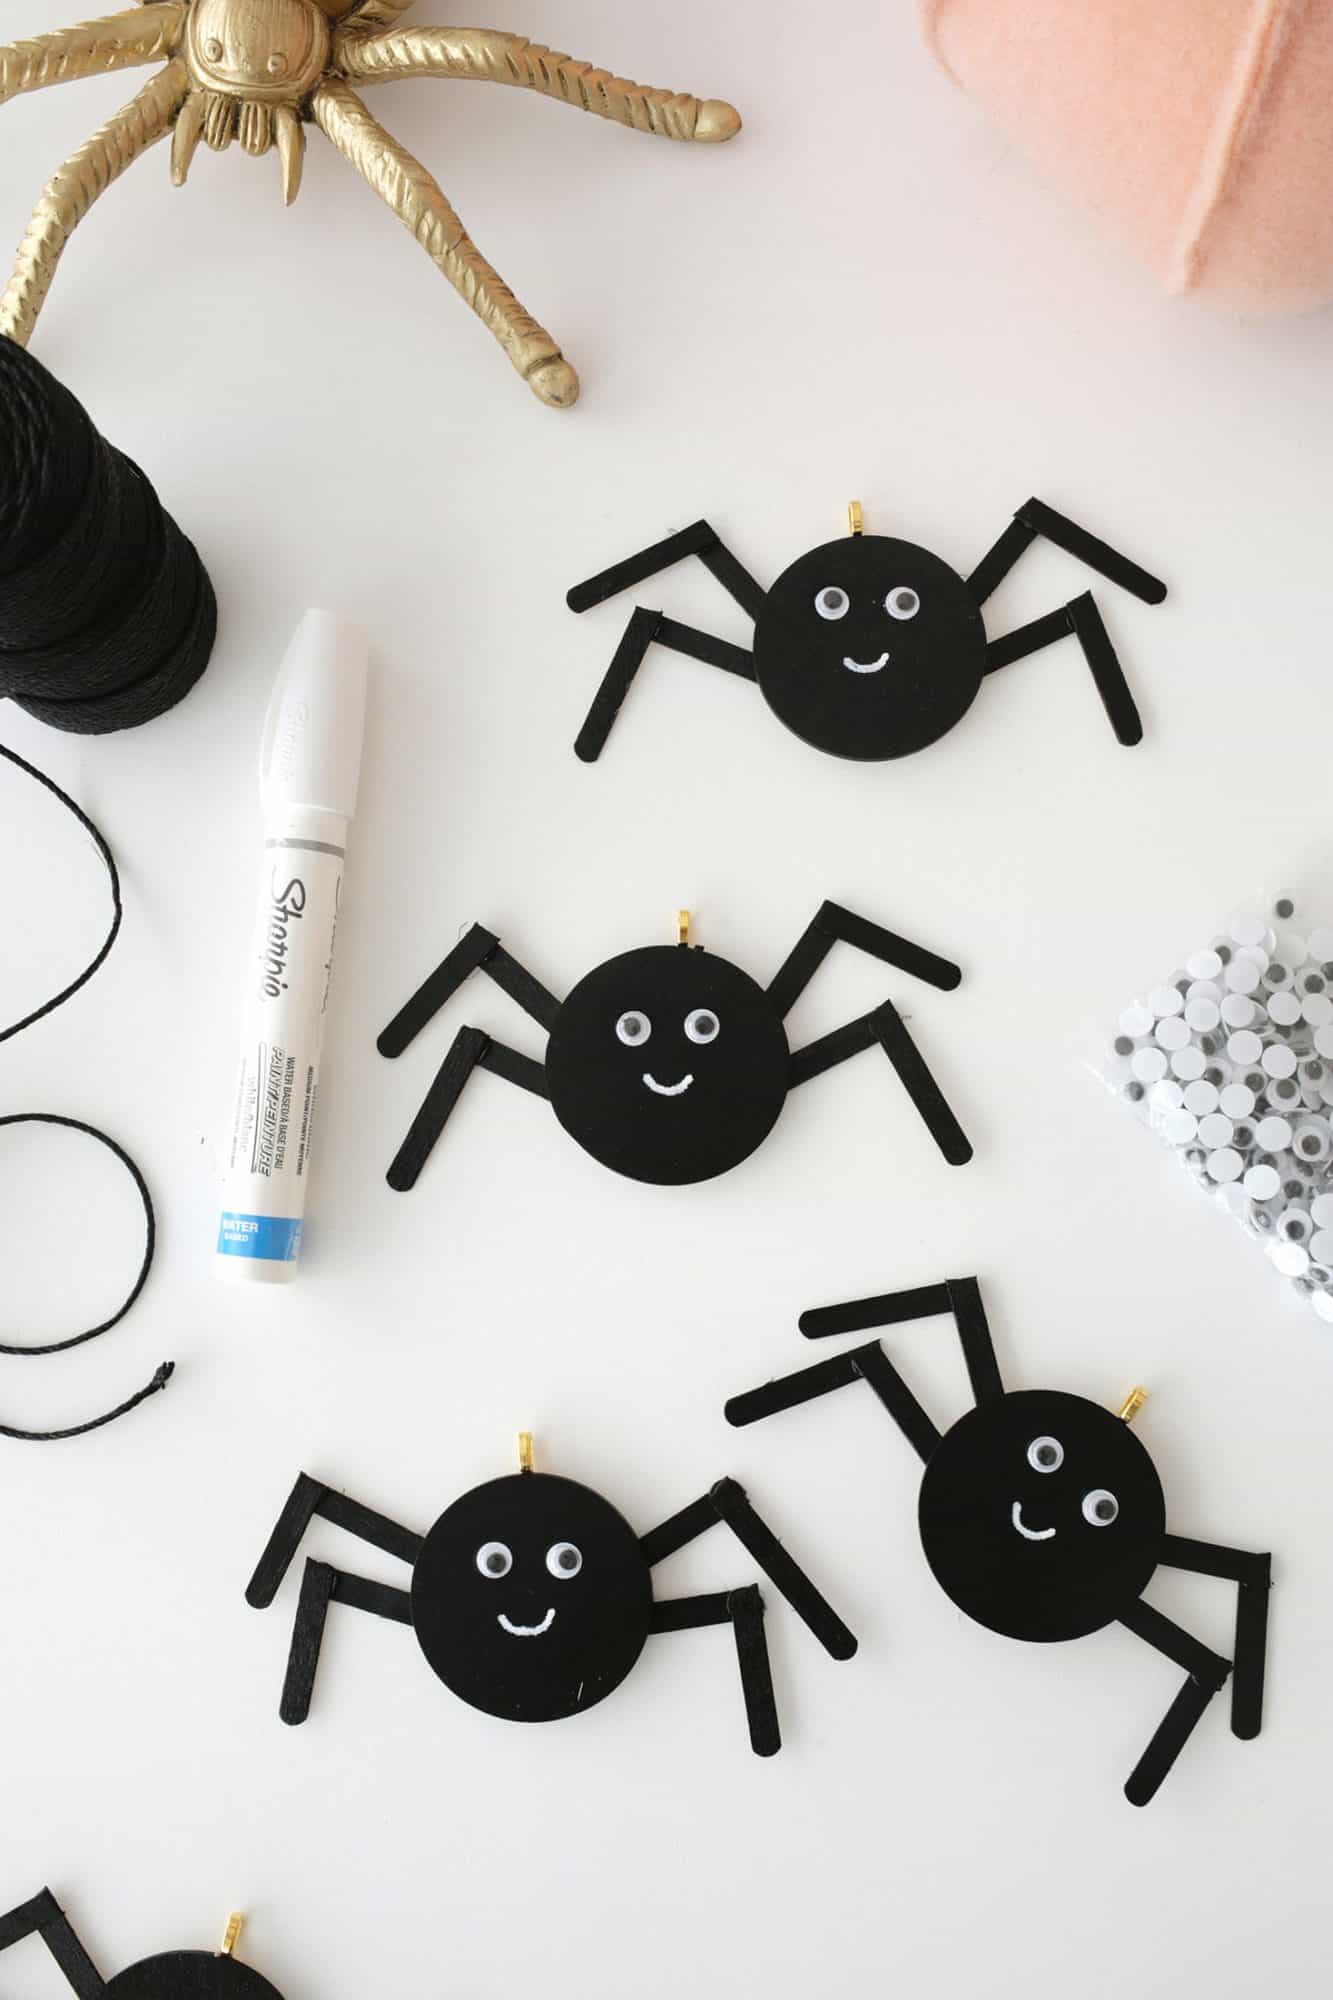 wooden spiders painted black with google eyes and smiley faces drawn on